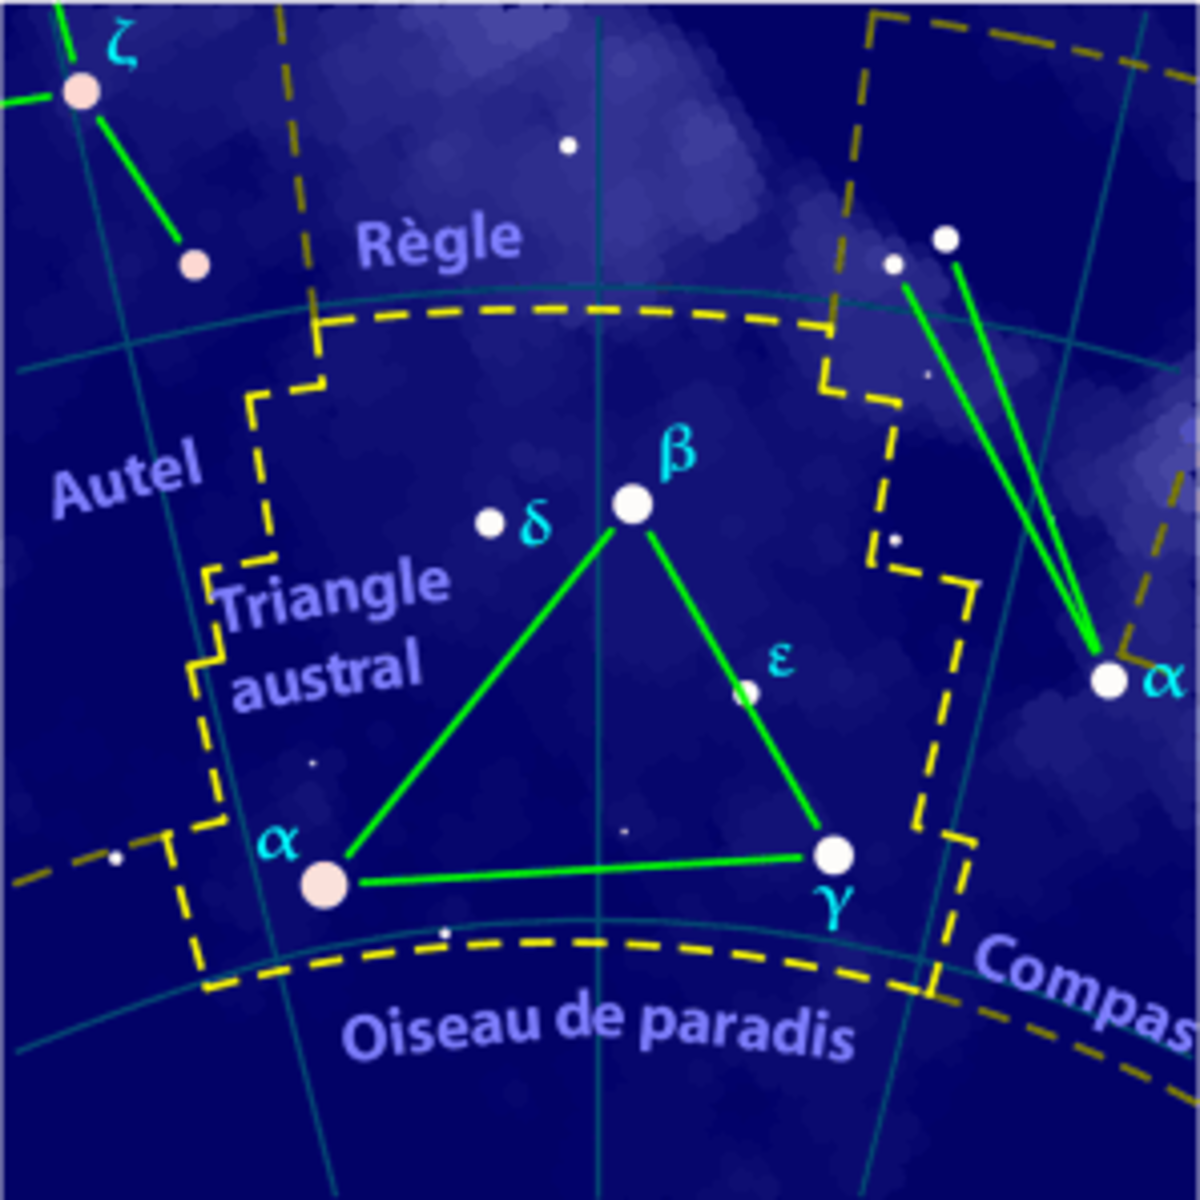 Triangle austral